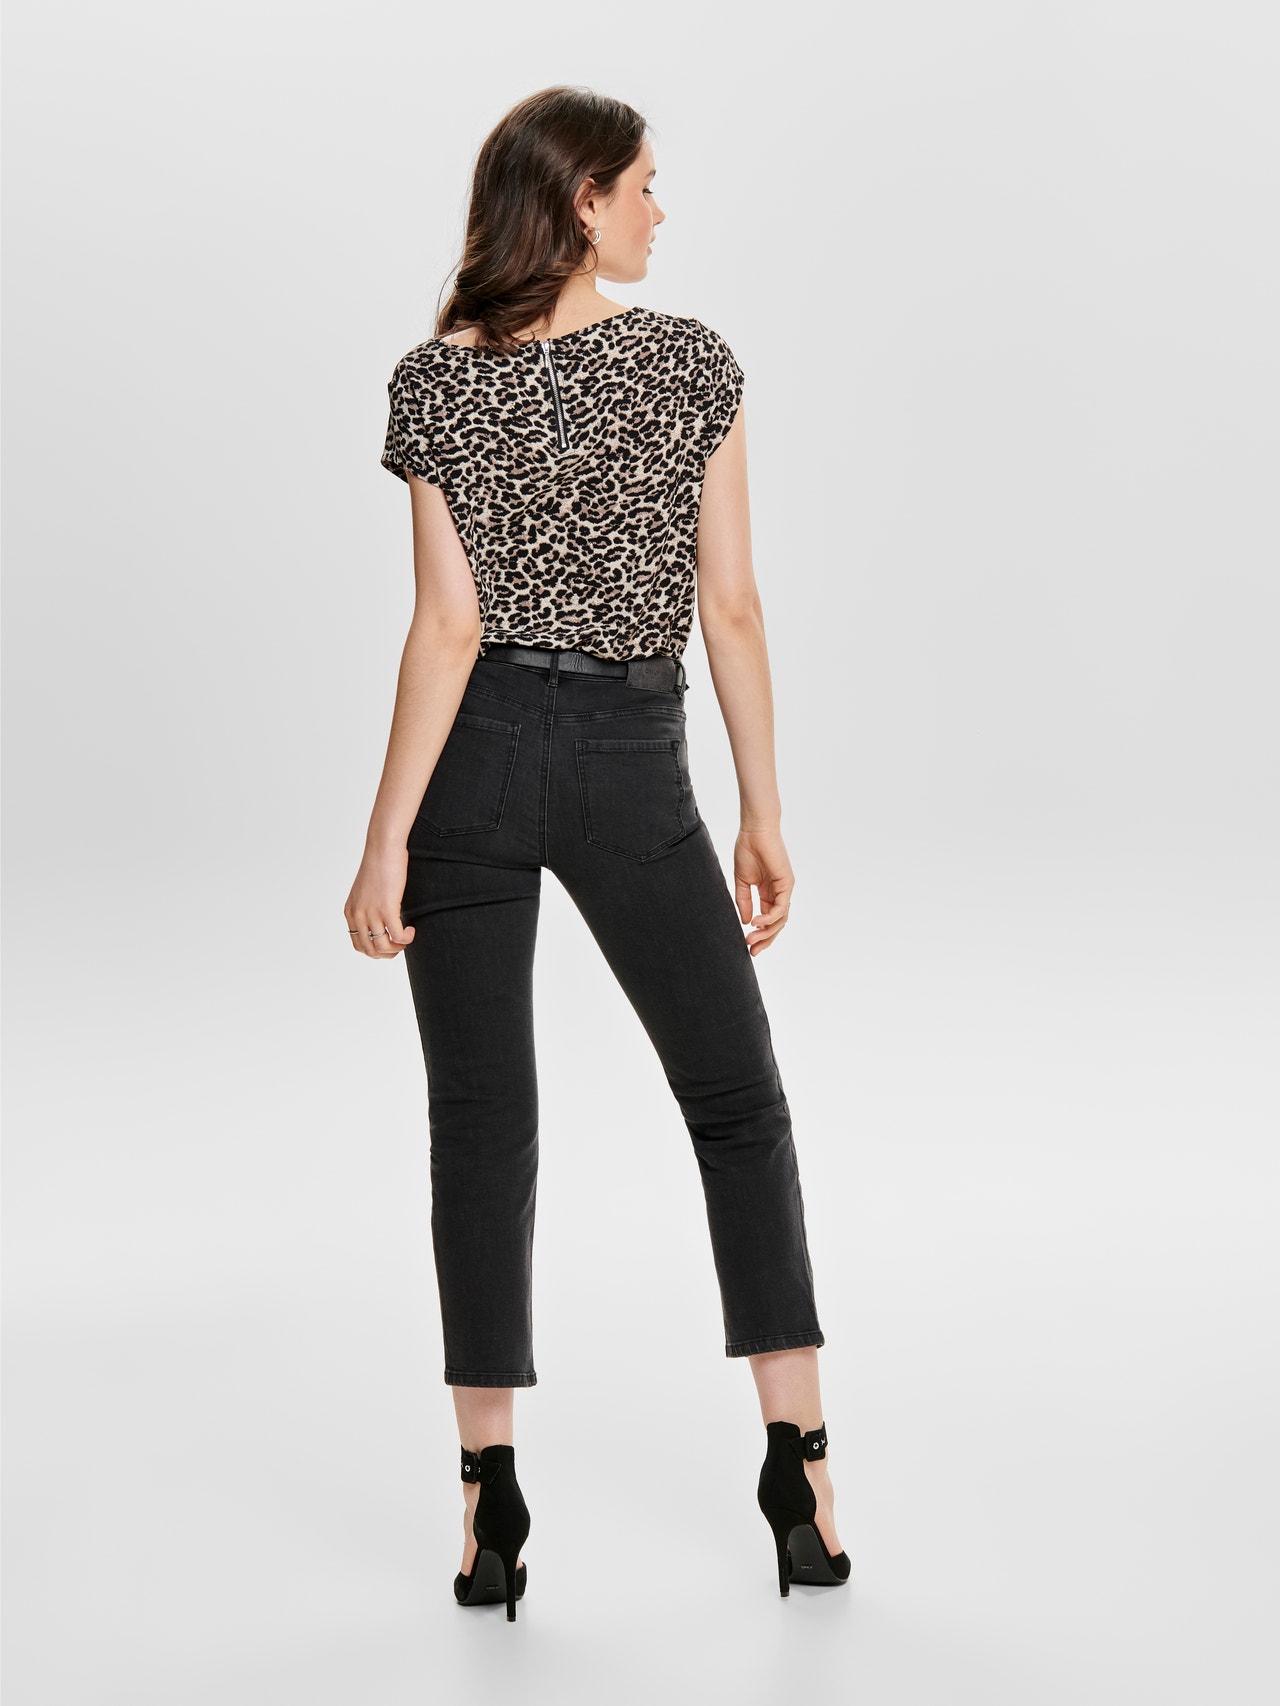 ONLY Printed Short Sleeved Top -Pumice Stone - 15161116